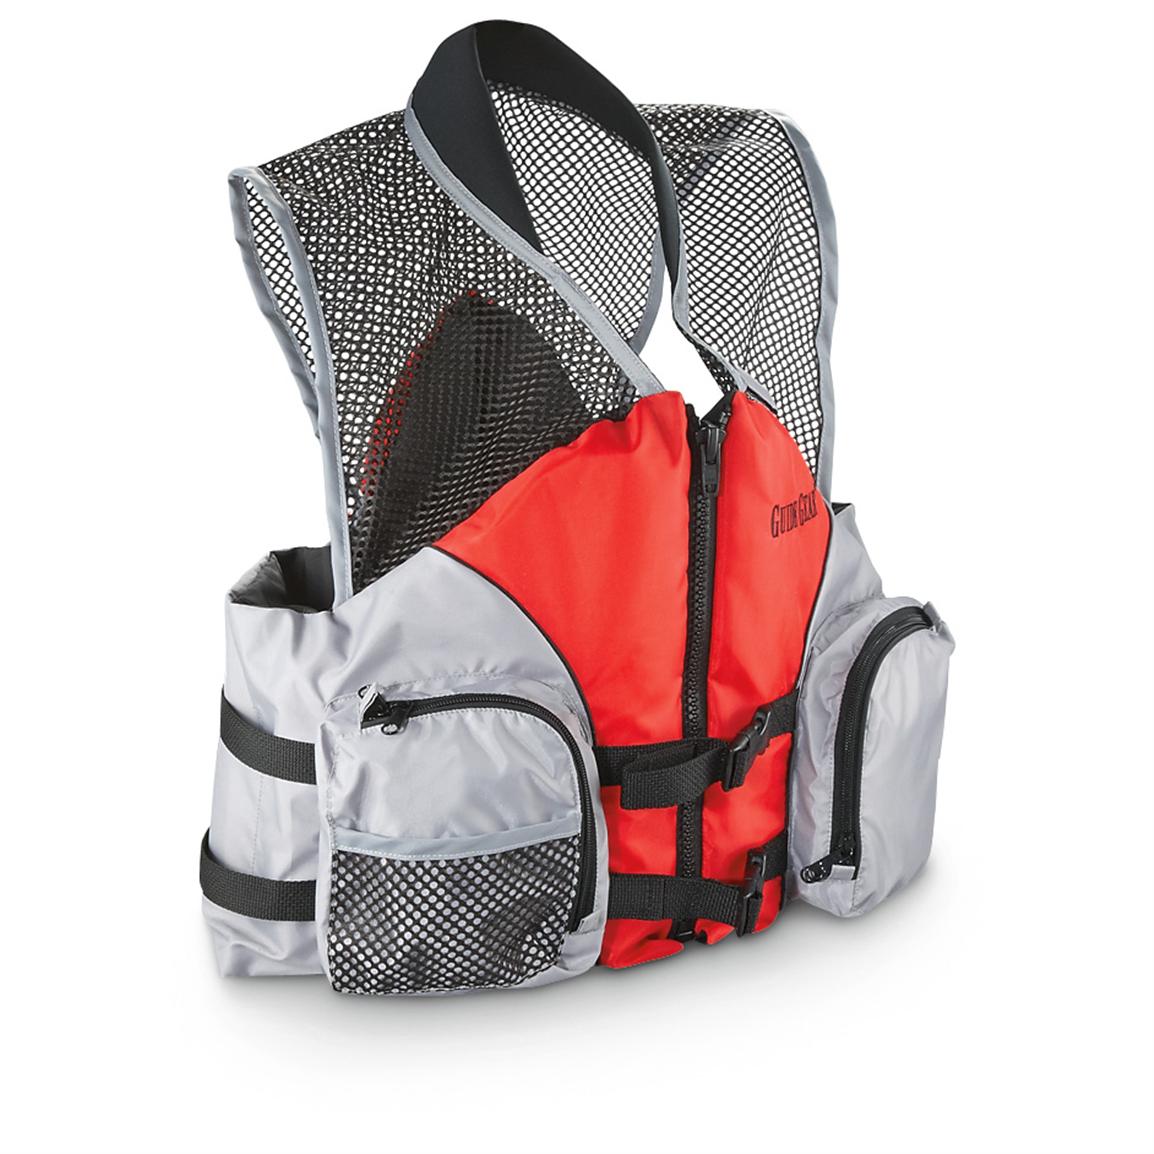 Guide Gear Water Sports Mesh Fishing Life Vest 581836